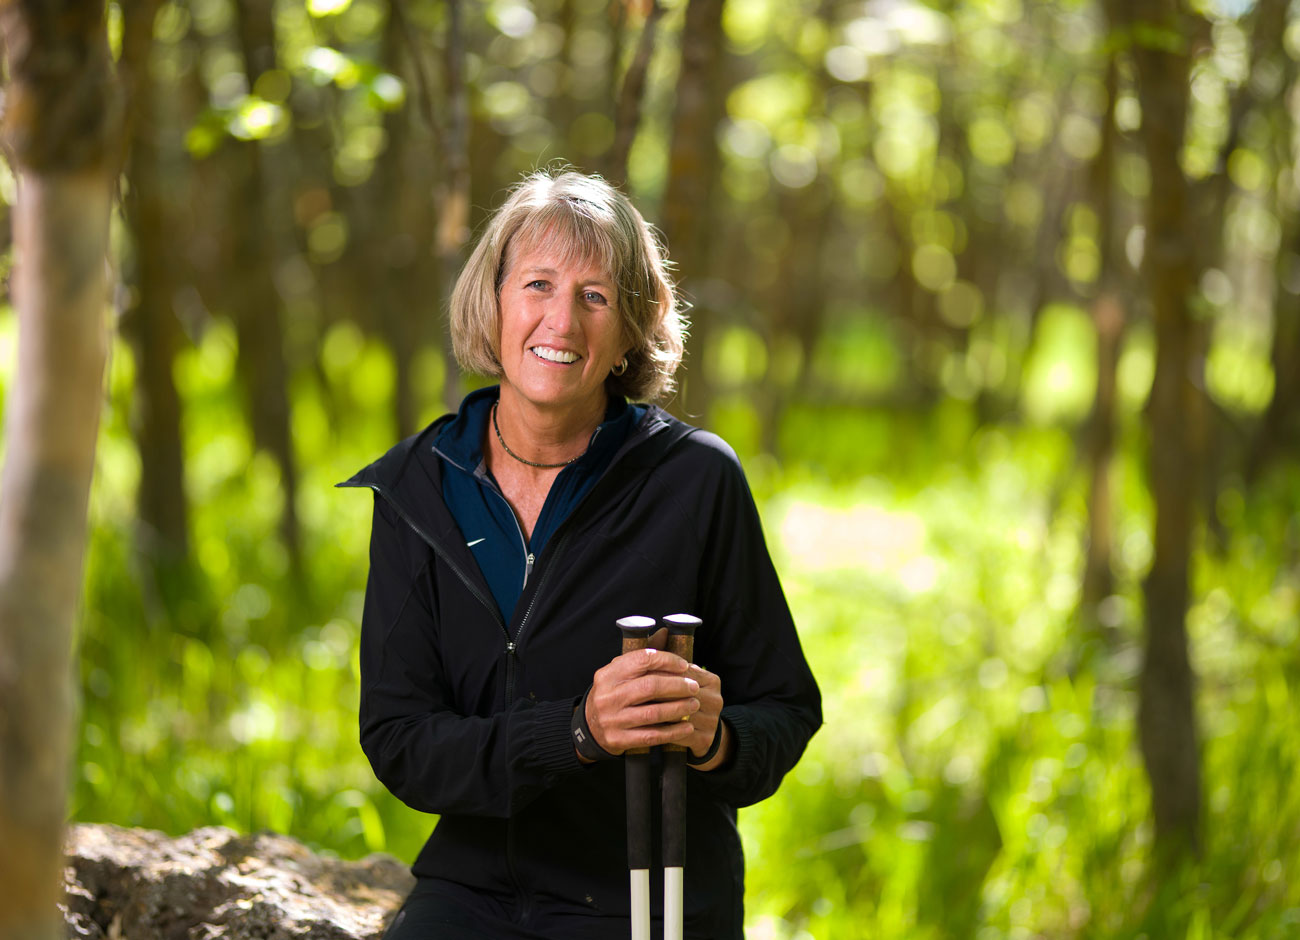 a woman in hiking gear holds a pair of hiking poles. She is sitting on a rock and smiling. She is surrounded by green trees with sunlight filtering through.